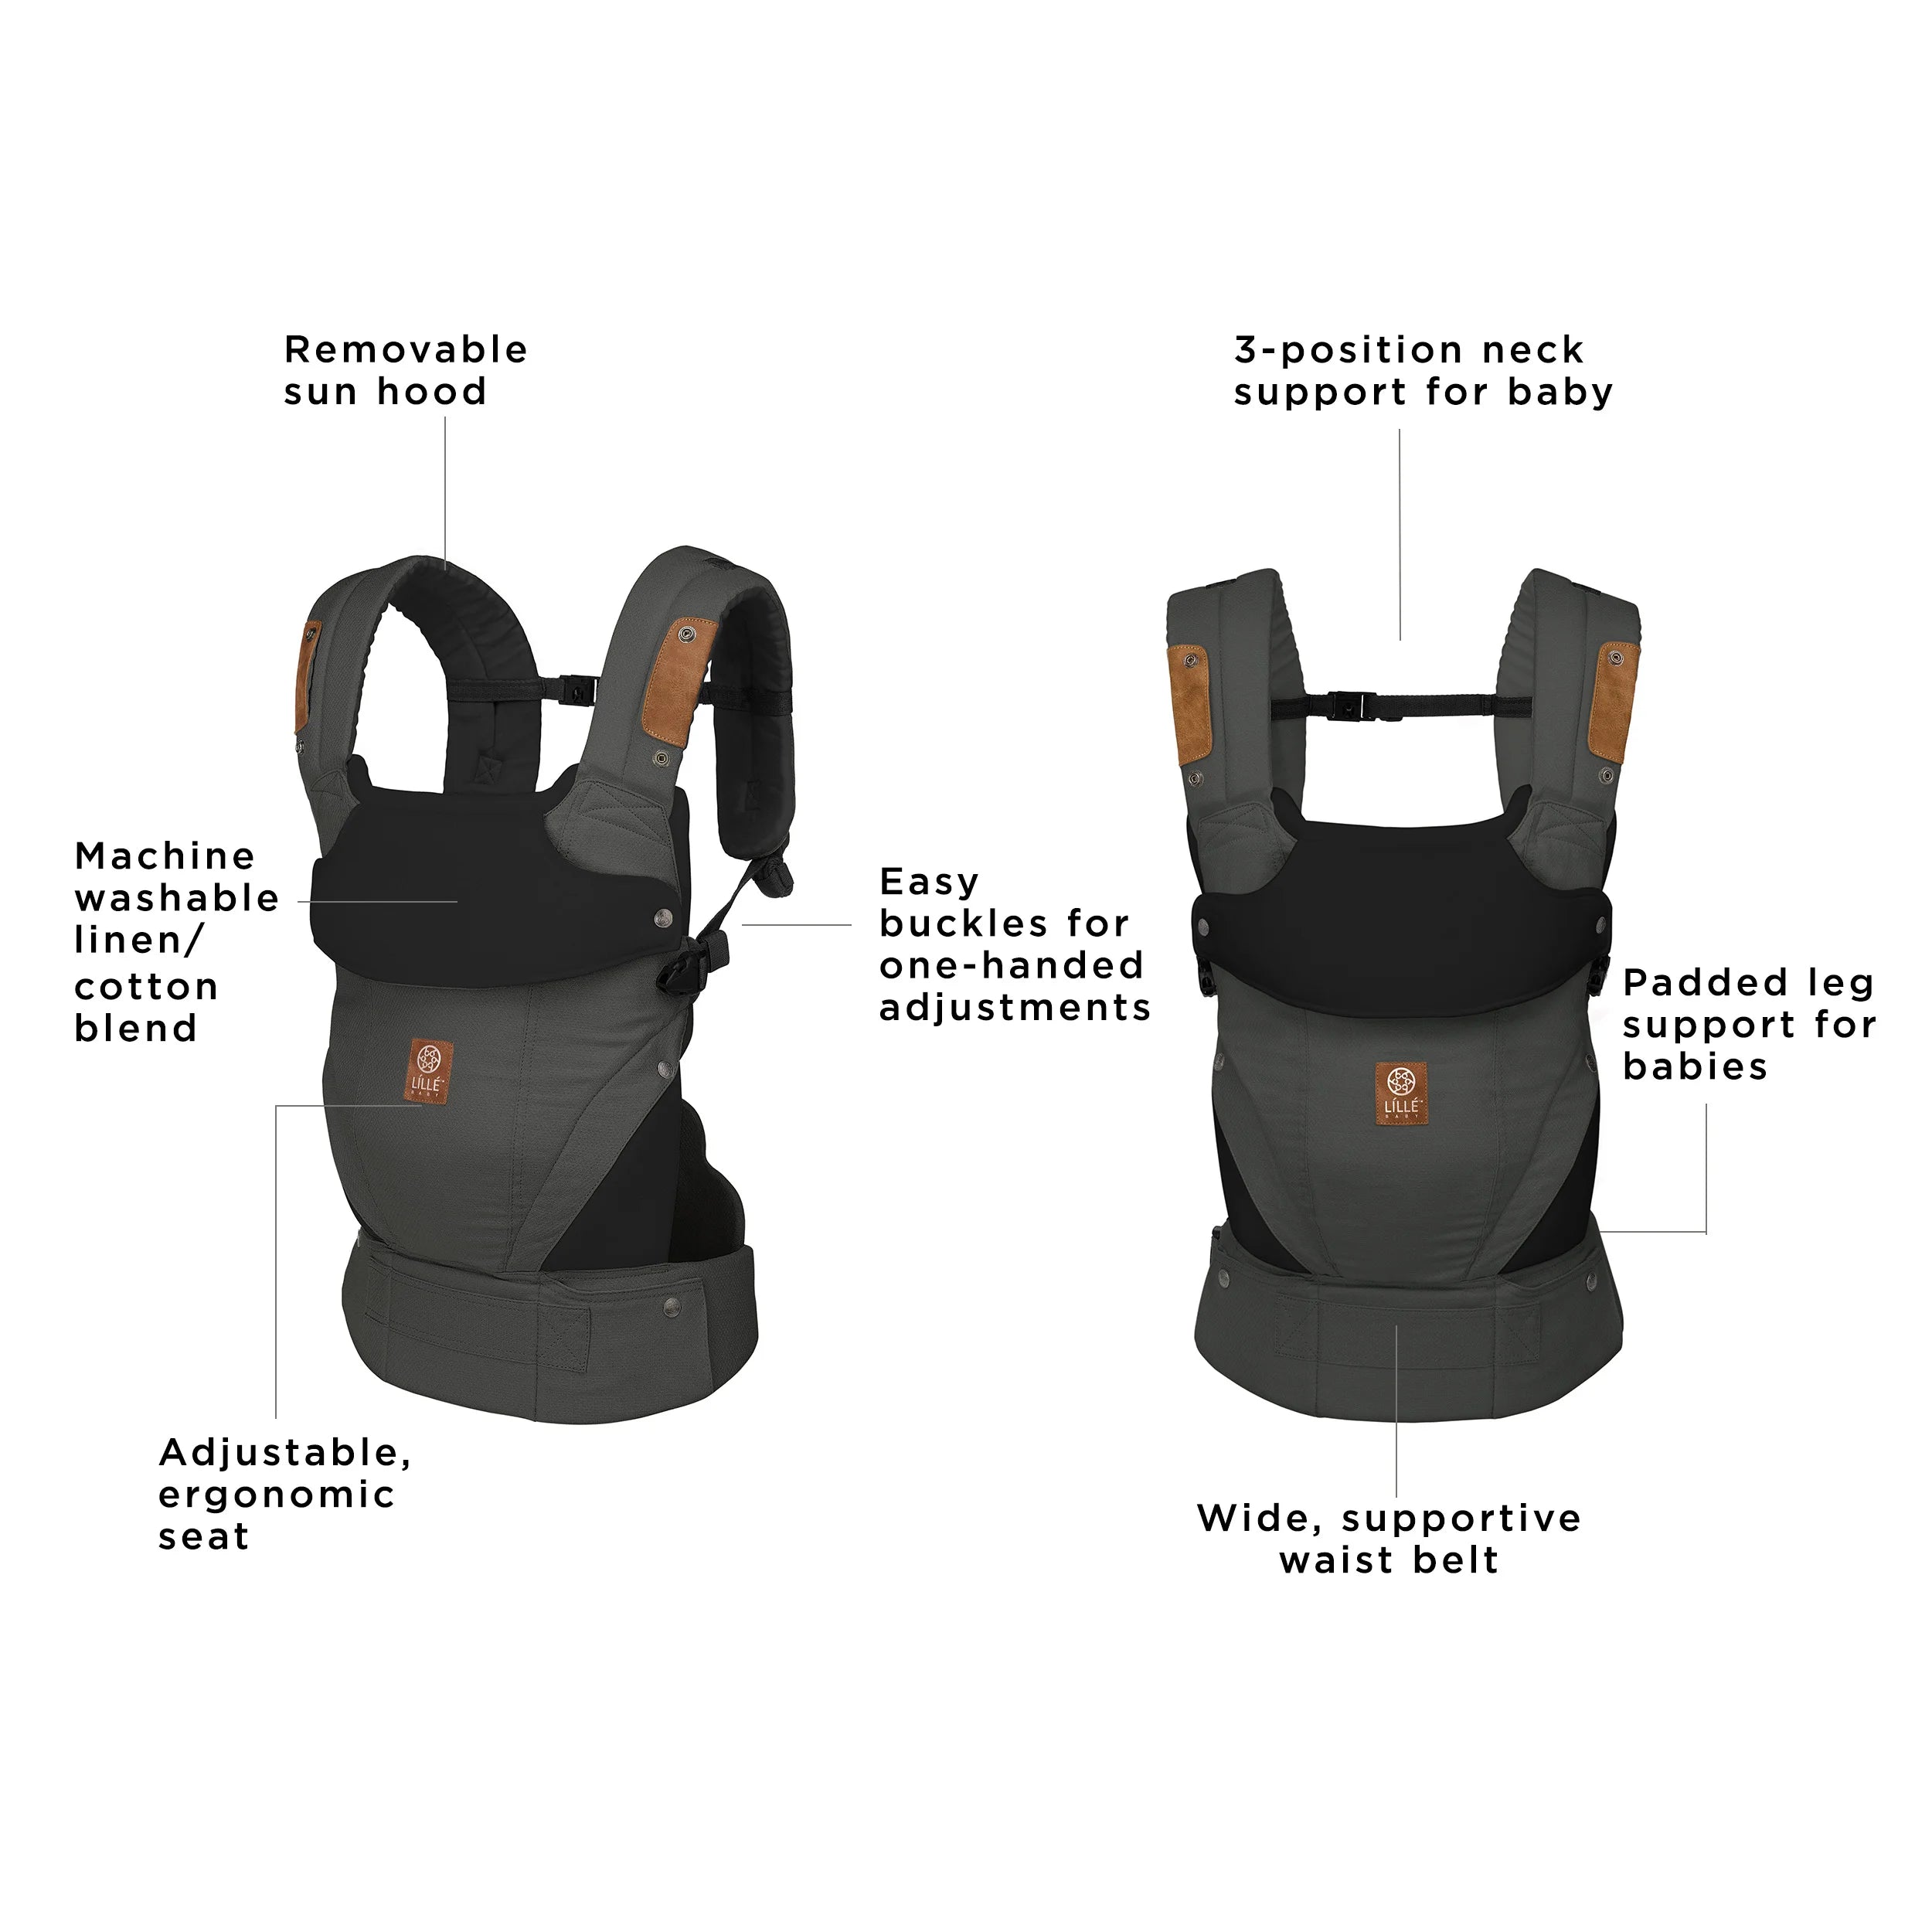 elevate carrier has a removable sun hood, machine washable/linen cotton blend, adjustable, ergonomic seat, easy buckles for one-handed adjustments, 3 position neck support for baby, padded leg support for babies, wide supportive waist belt